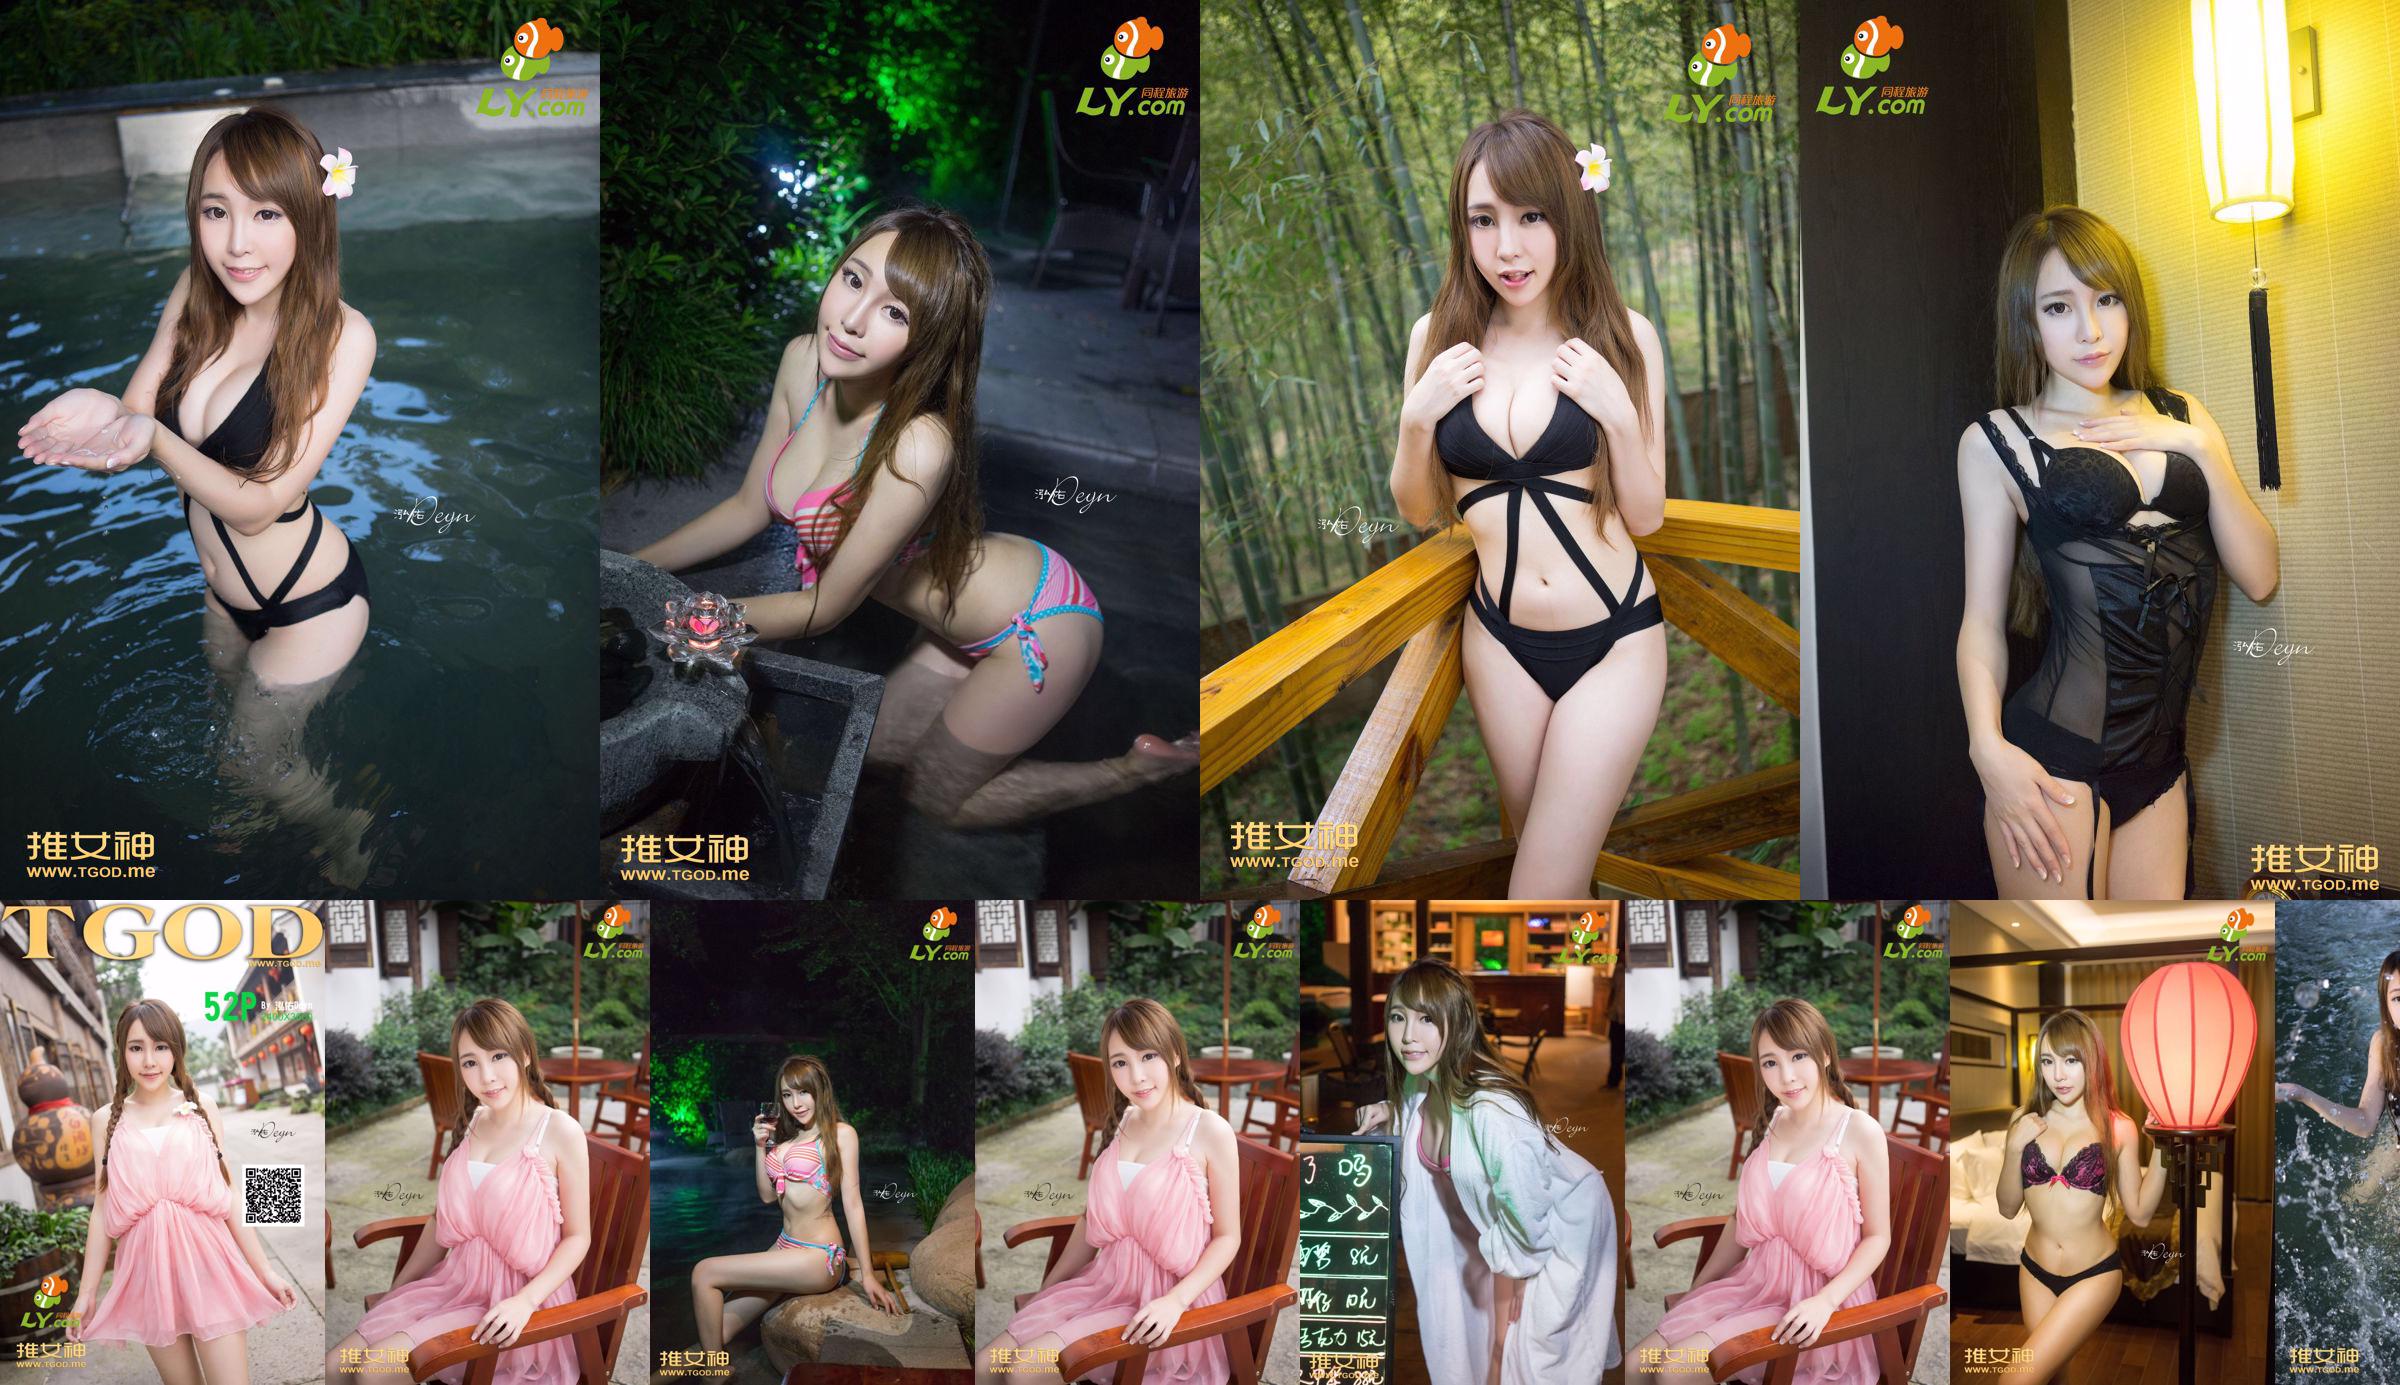 Huang Mengxian "Where Is the Goddess Going Issue 7" [TGOD Push Goddess] No.2c8cc9 Pagina 3